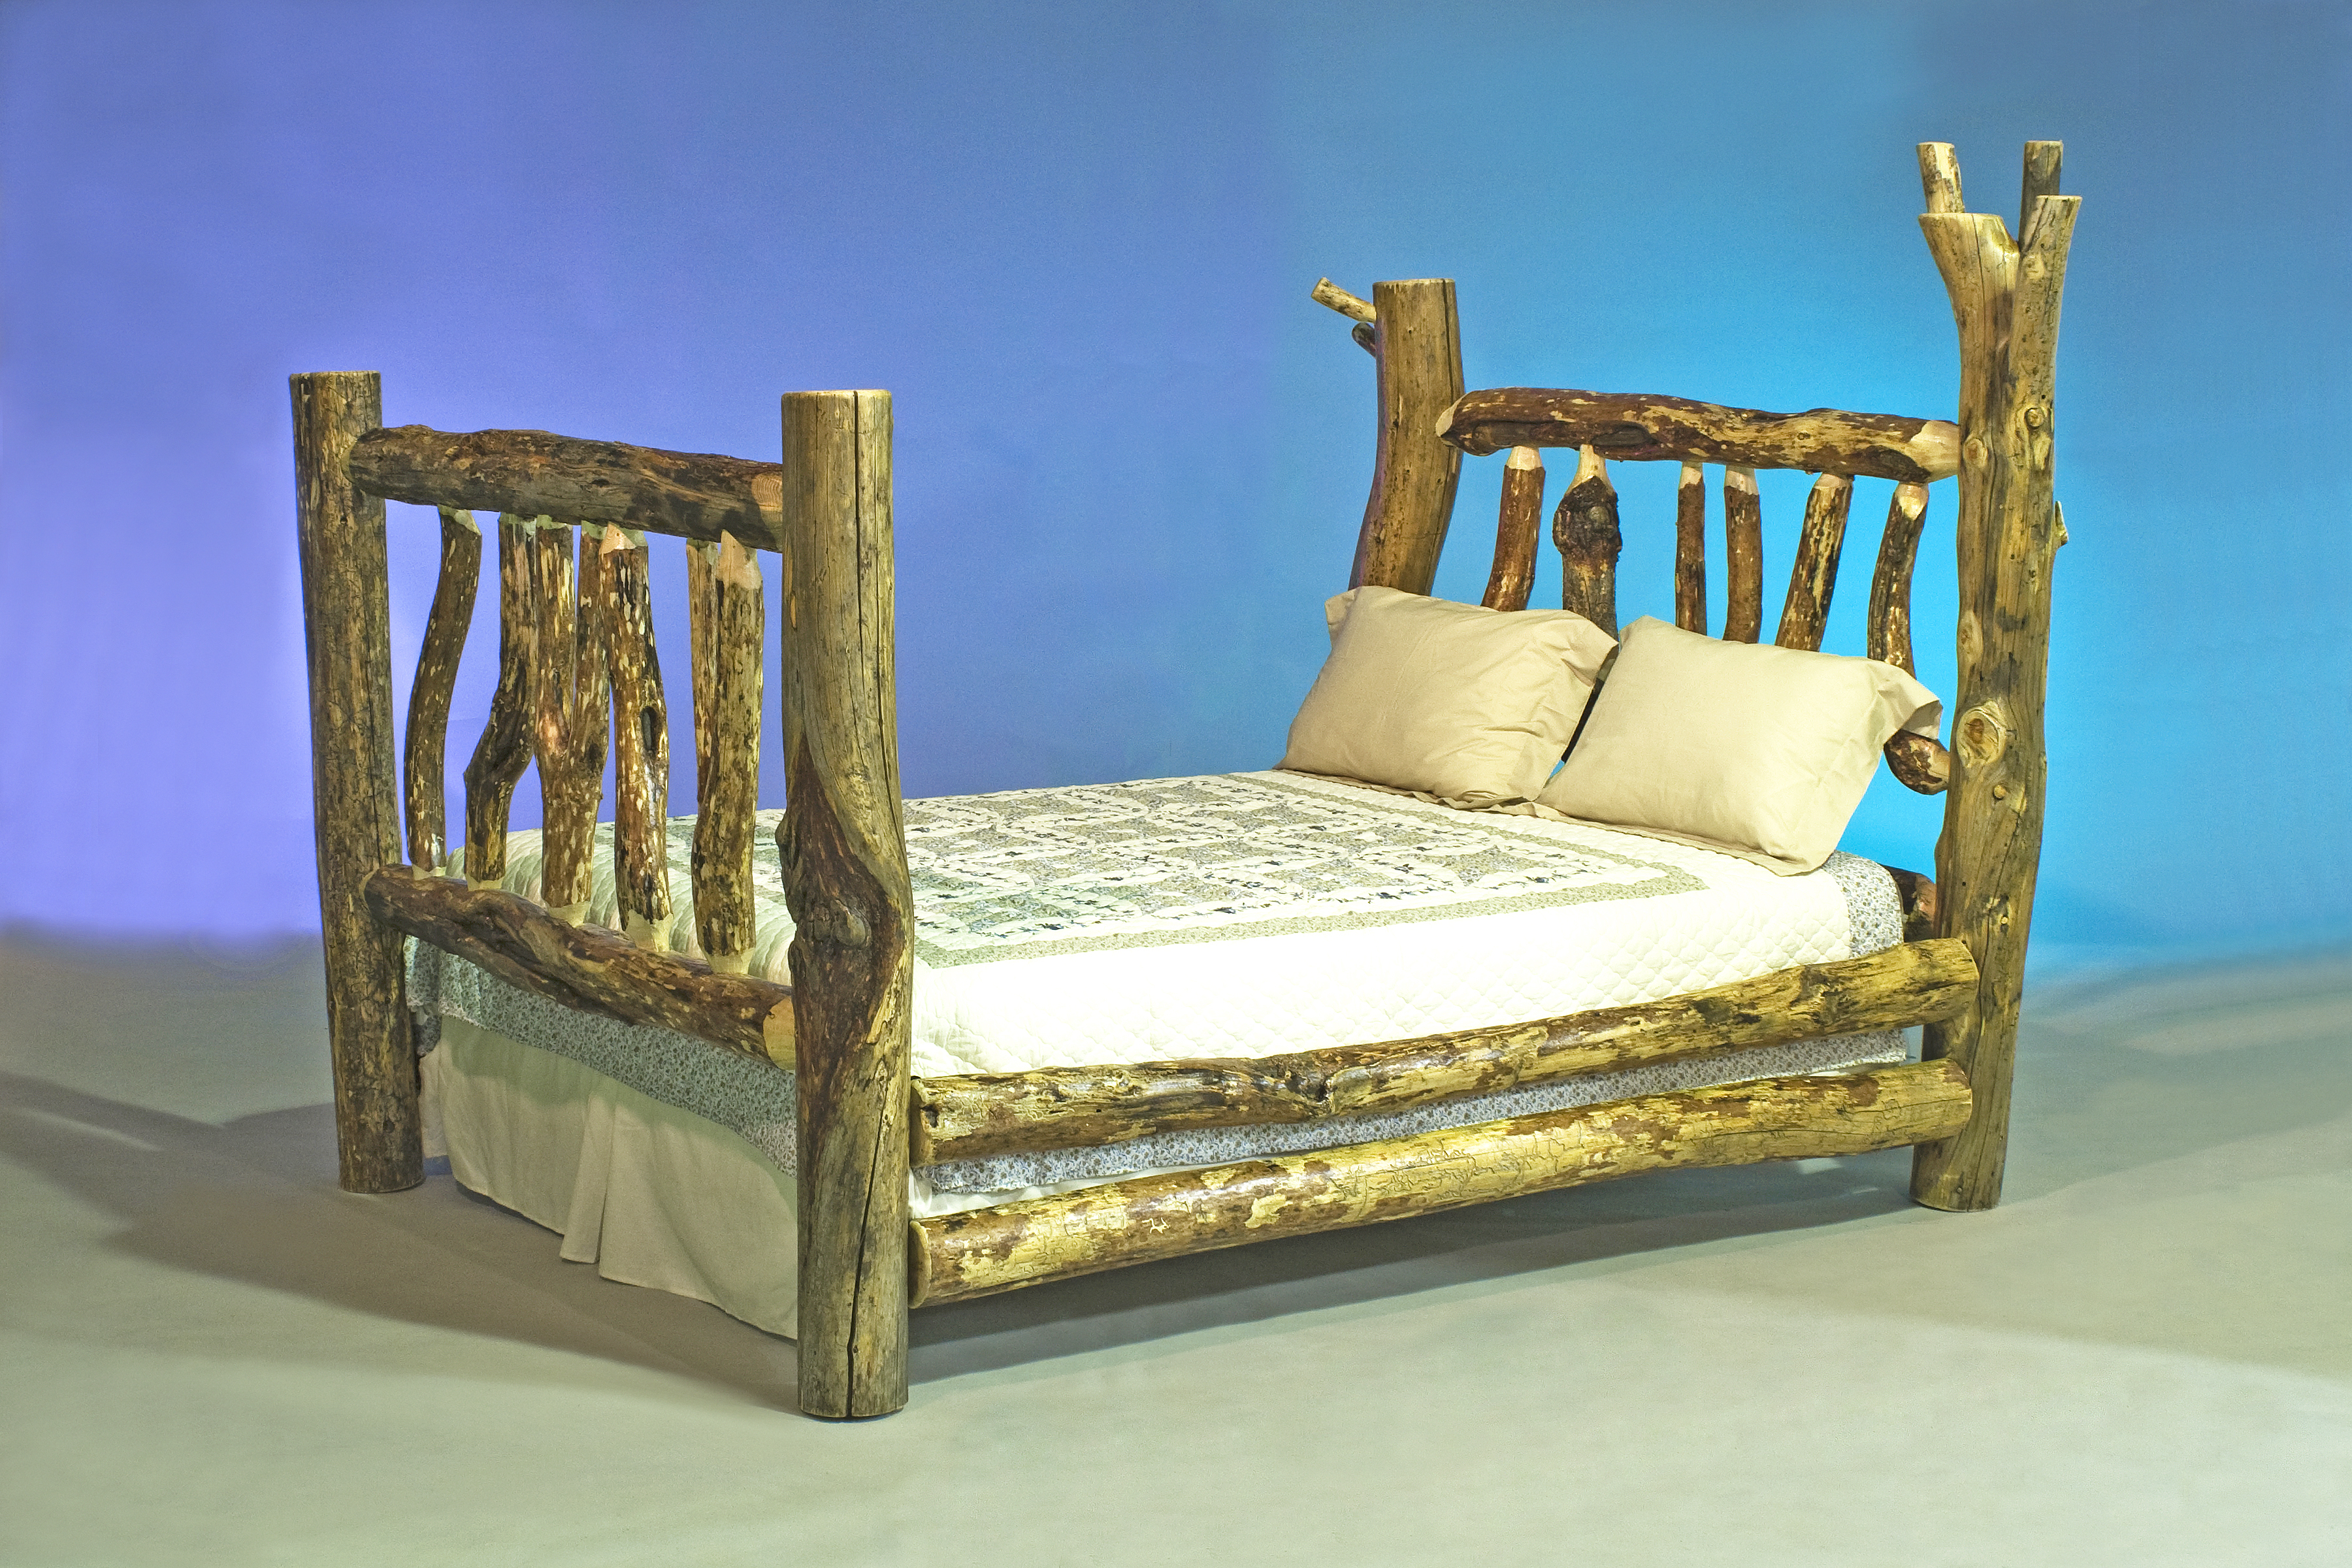 File:Log Furniture Queen Bed.jpg - Wikimedia Commons